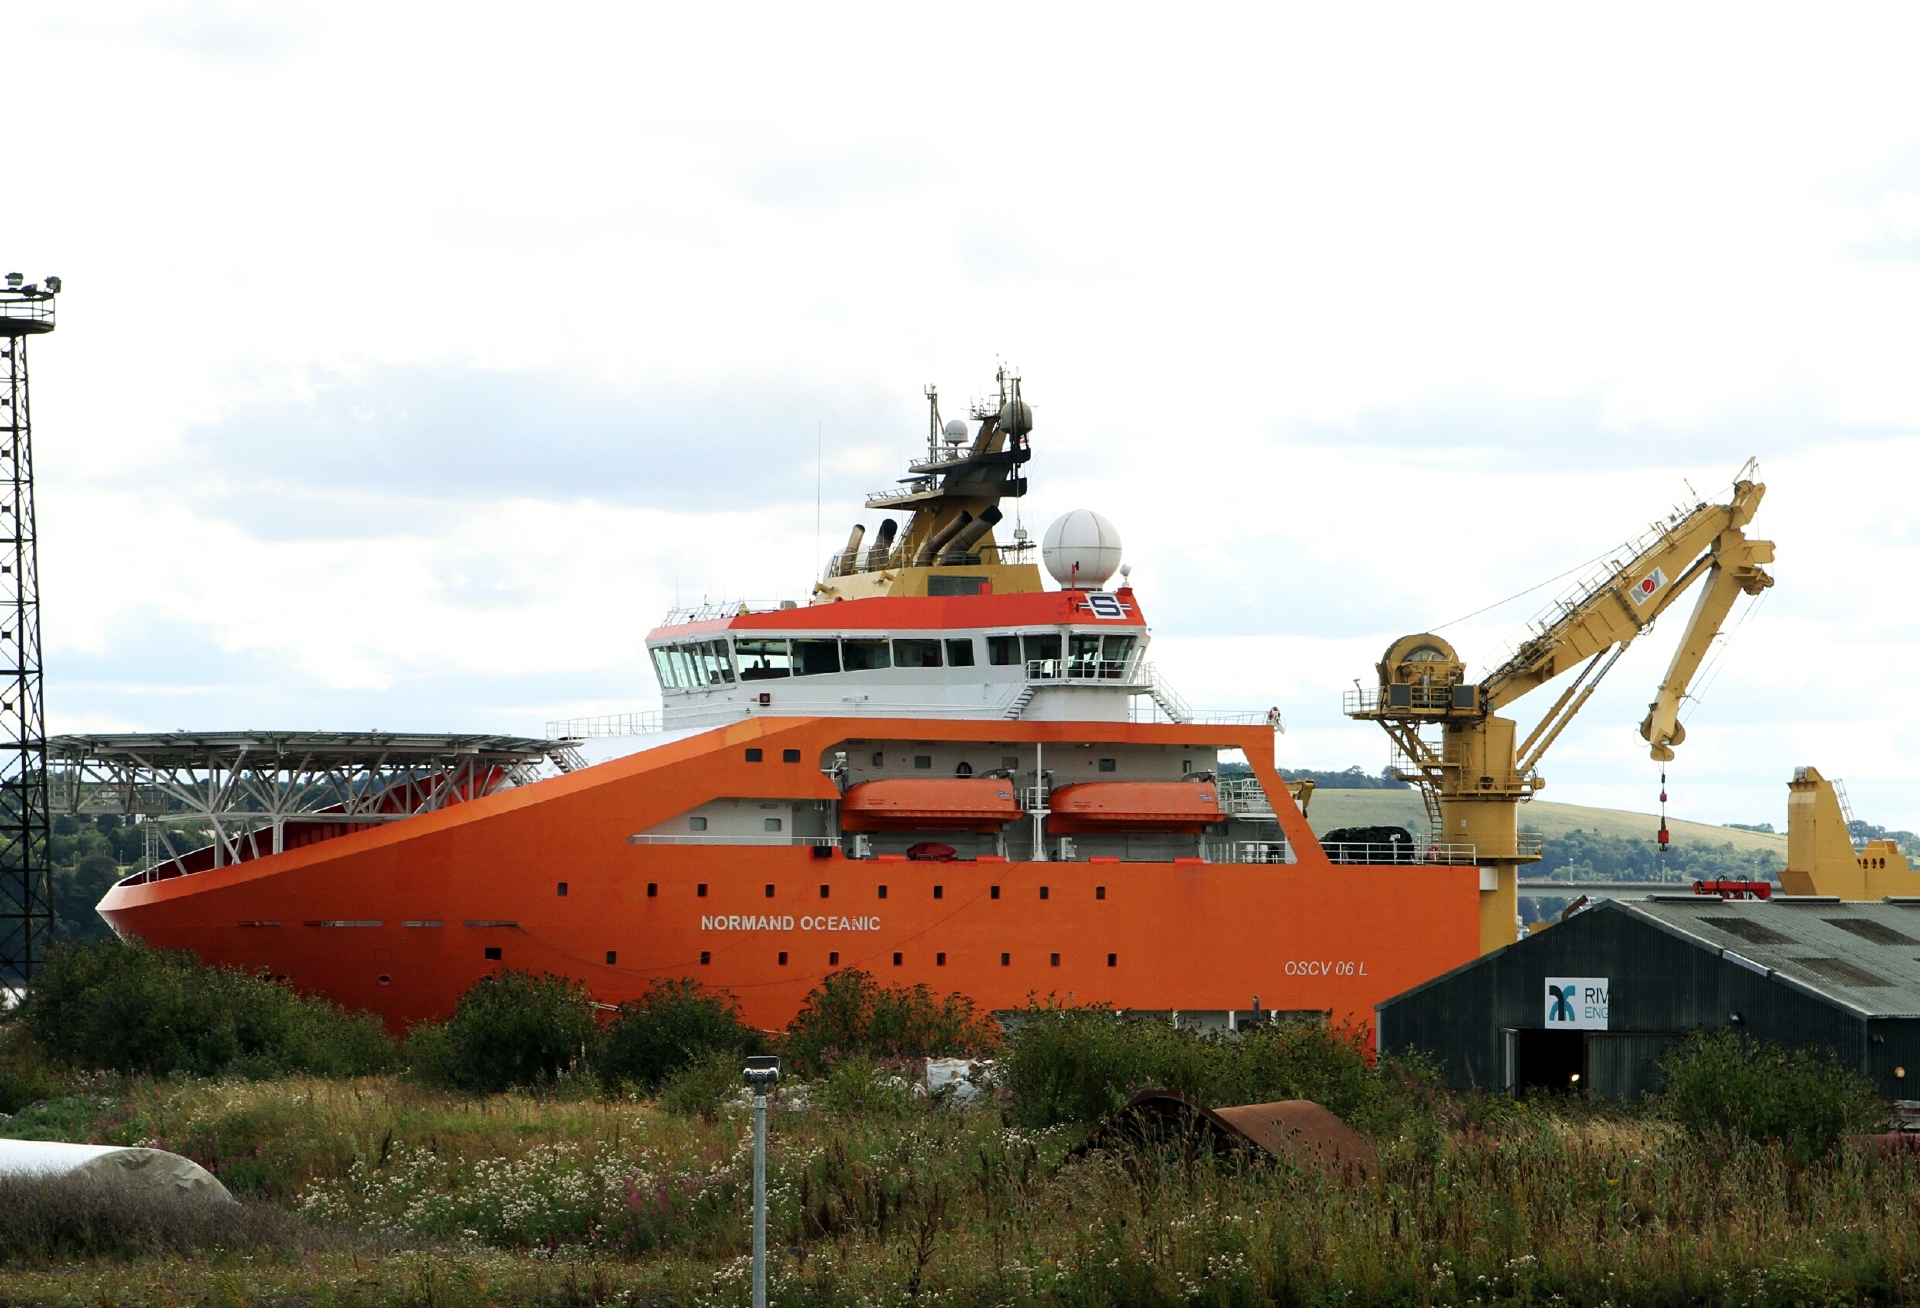 Subsea 7's Normand Oceanic at Dundee Port.